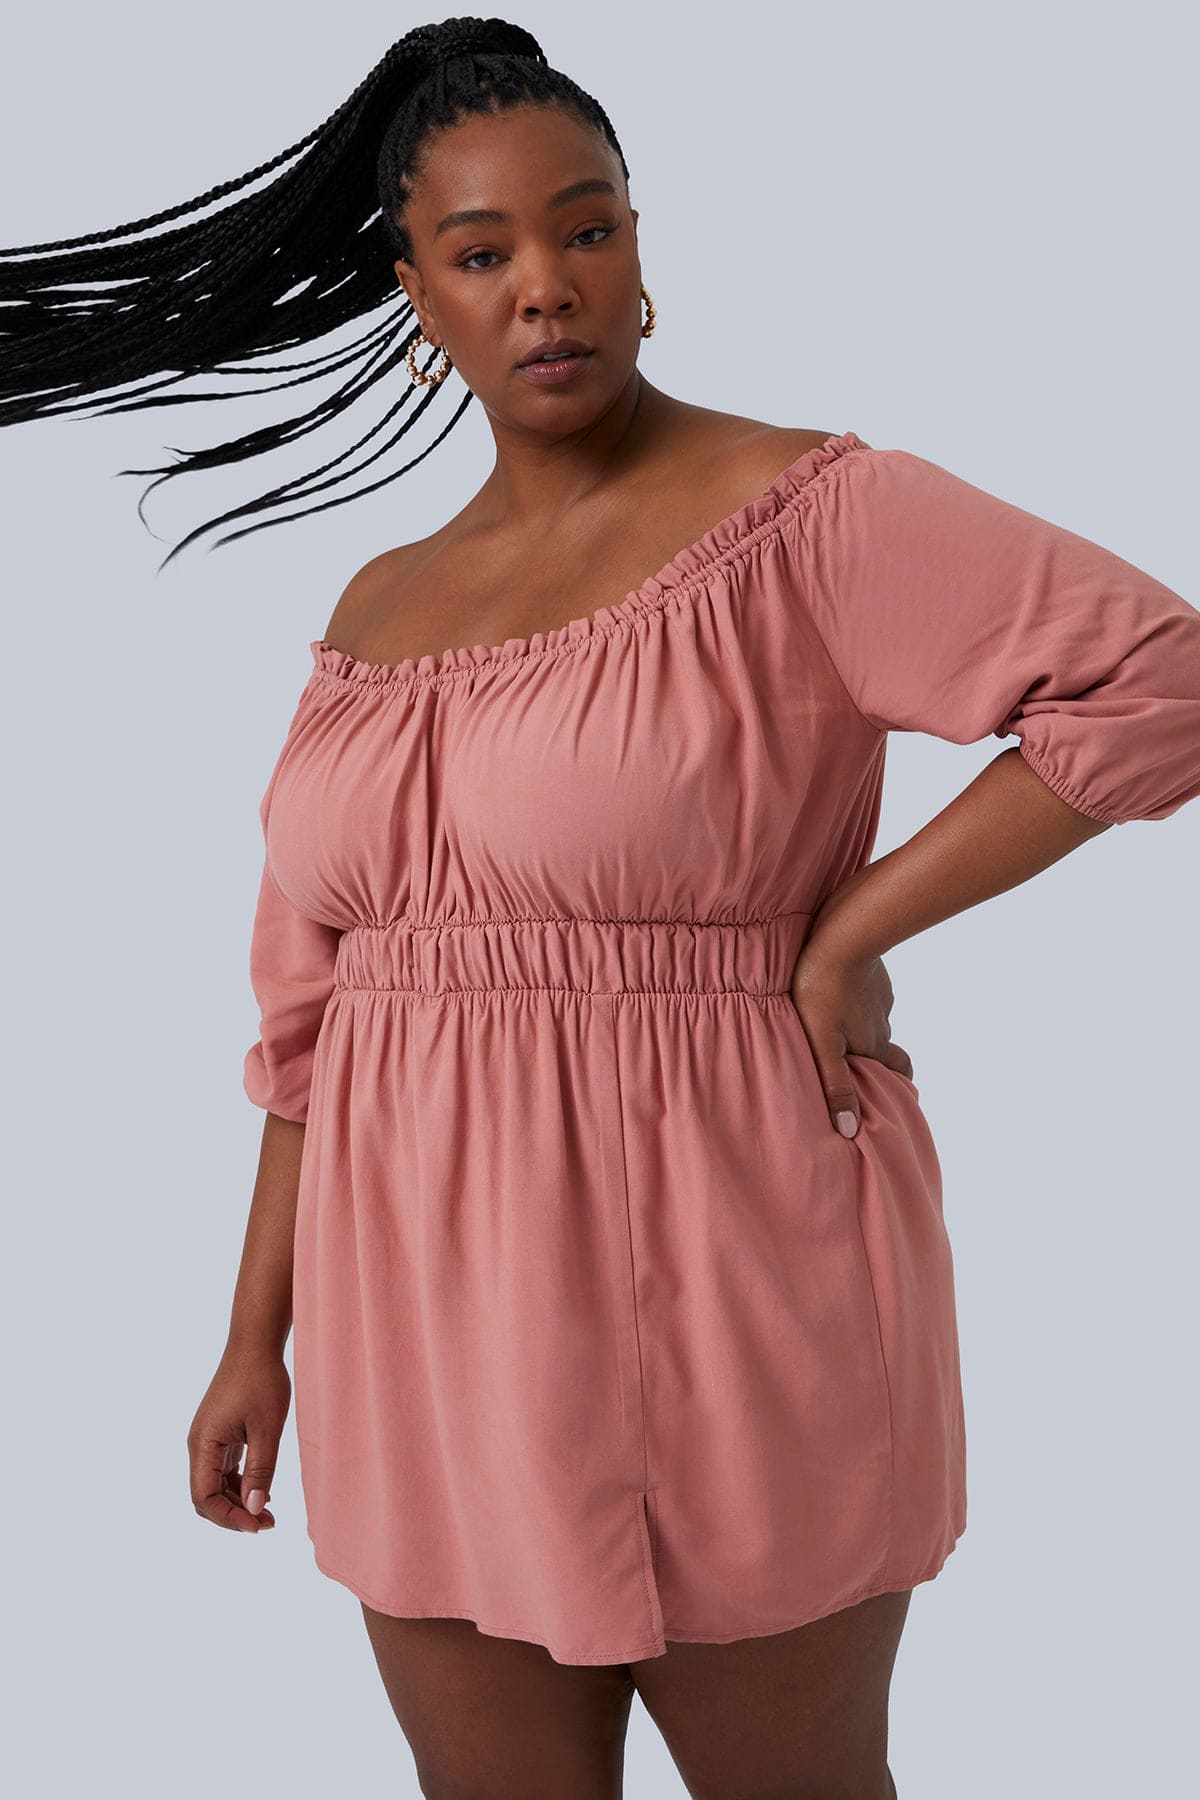 Model swinging her pony tail with braids while wearing the Gianna Mini Dress from Gia IRL Plus Size Boutique. Dress is in blush color and size 1X. Dress is slightly off the shoulder and a tiny peek-a-boo slit in the front.